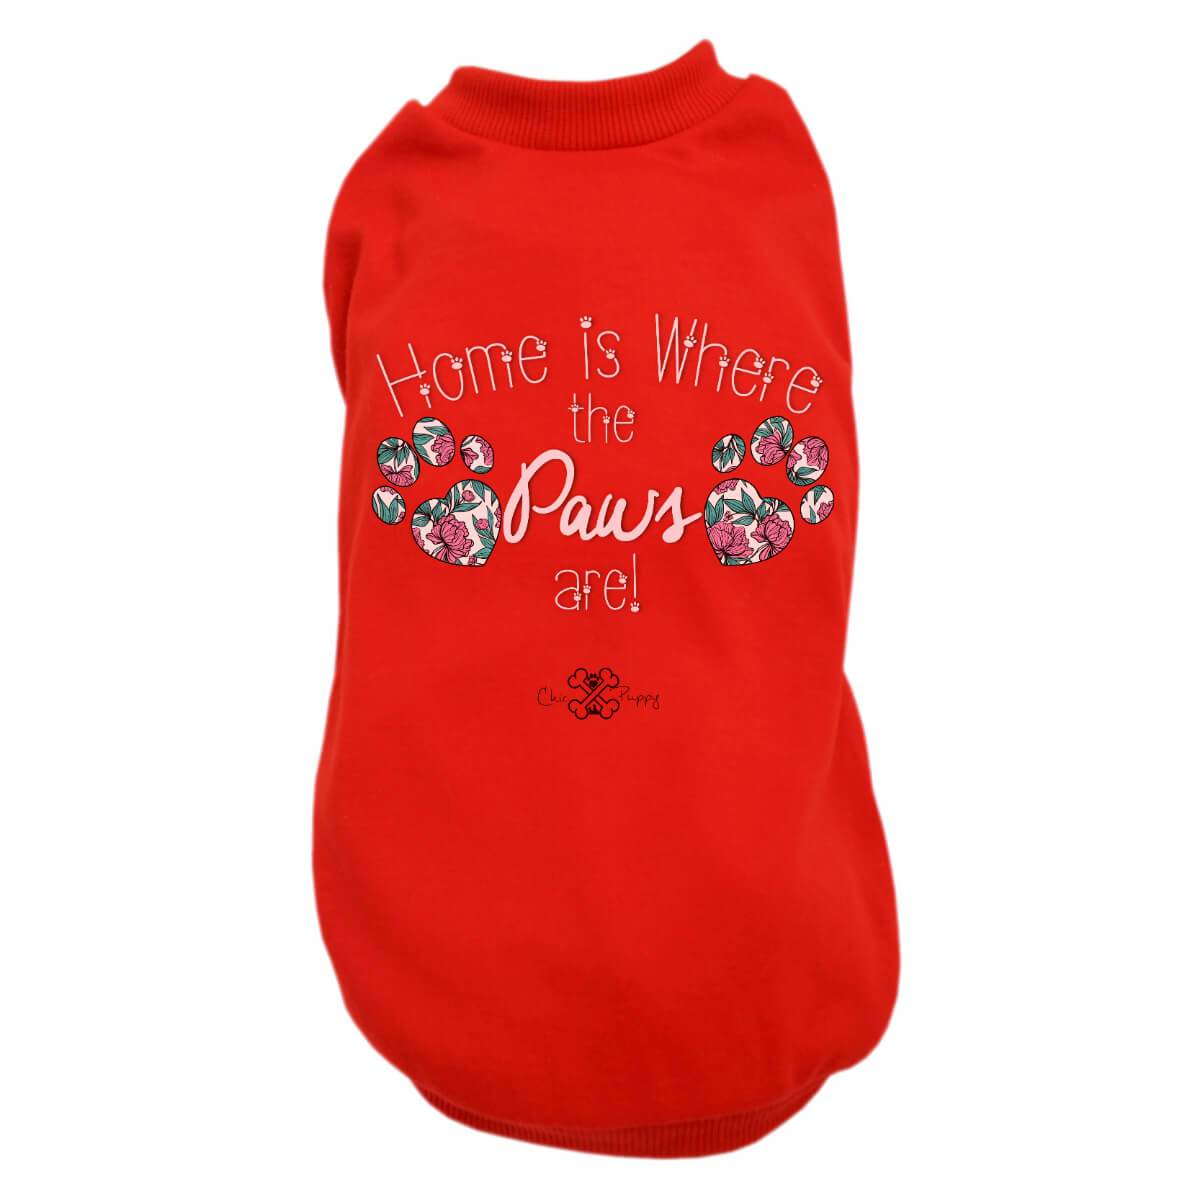 Home is Where the Paws Are! - Dog Shirts & Hoodies